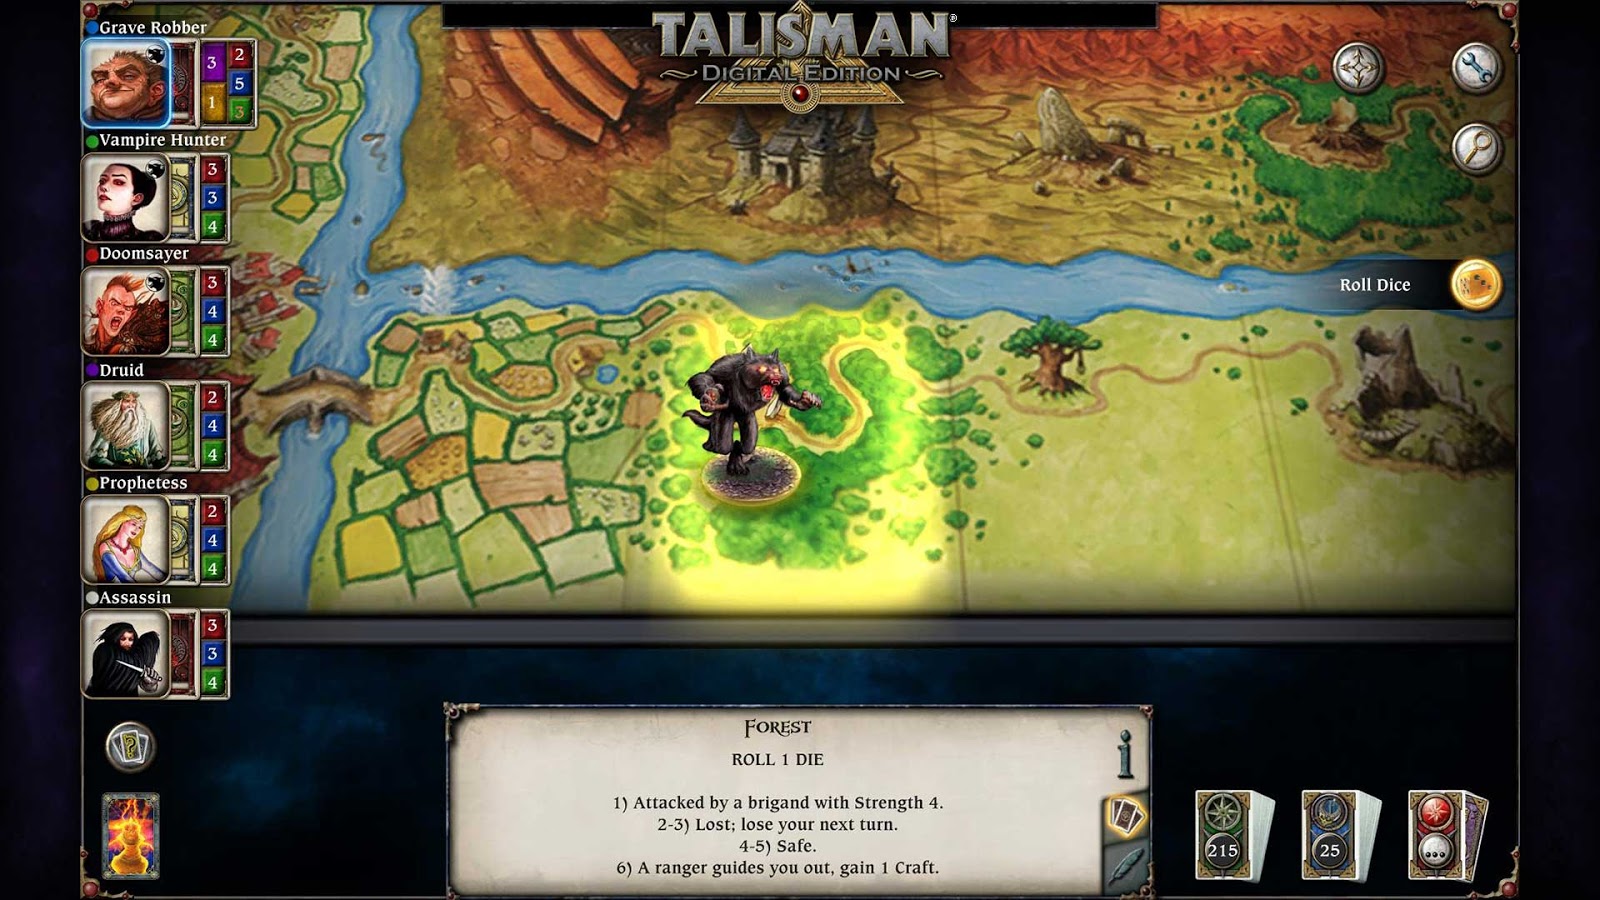 Talisman digital edition how to get all endings